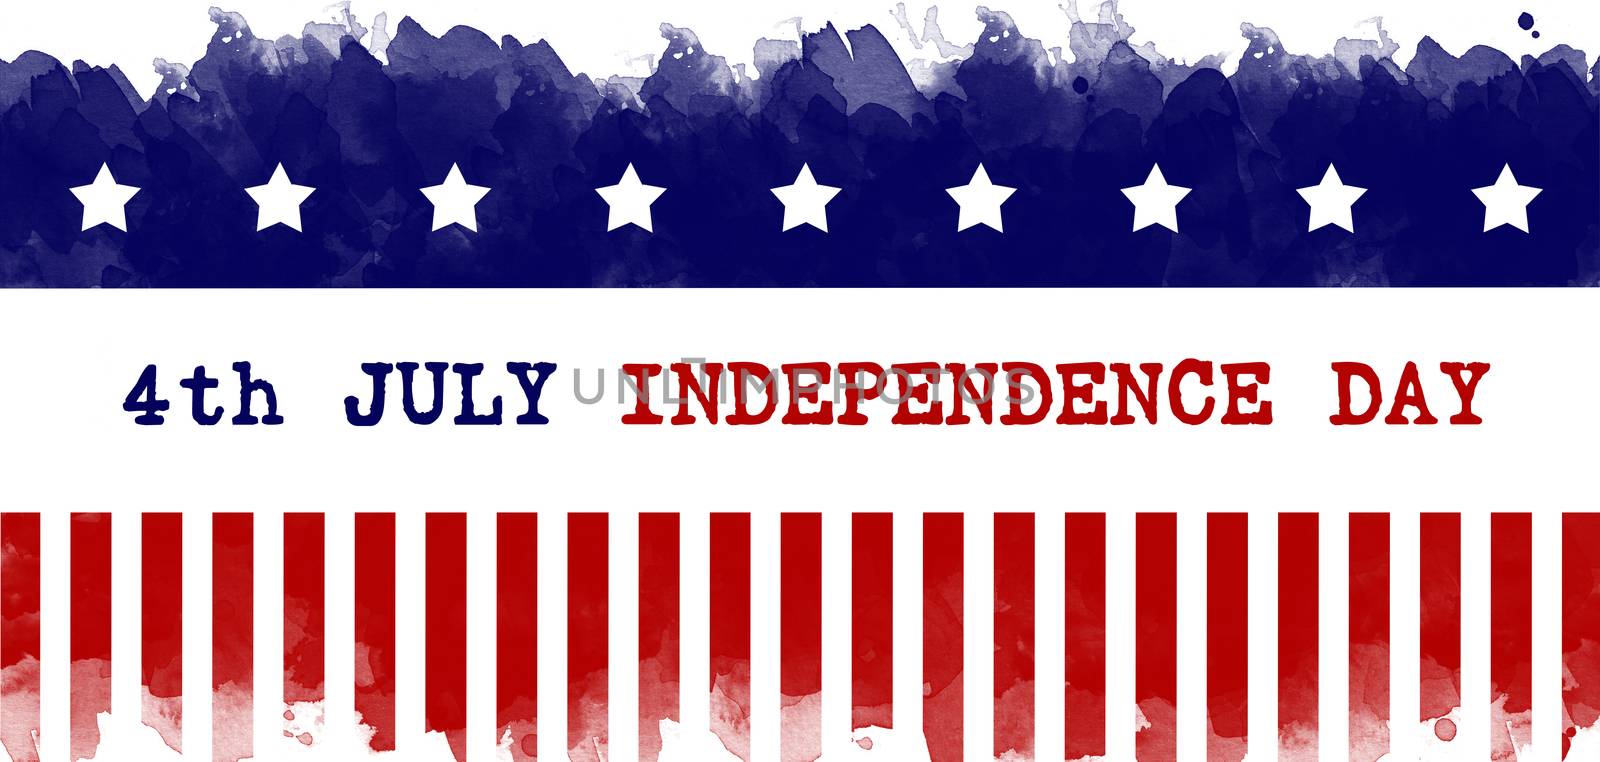 Independence Day greeting card american flag grunge background by asiandelight